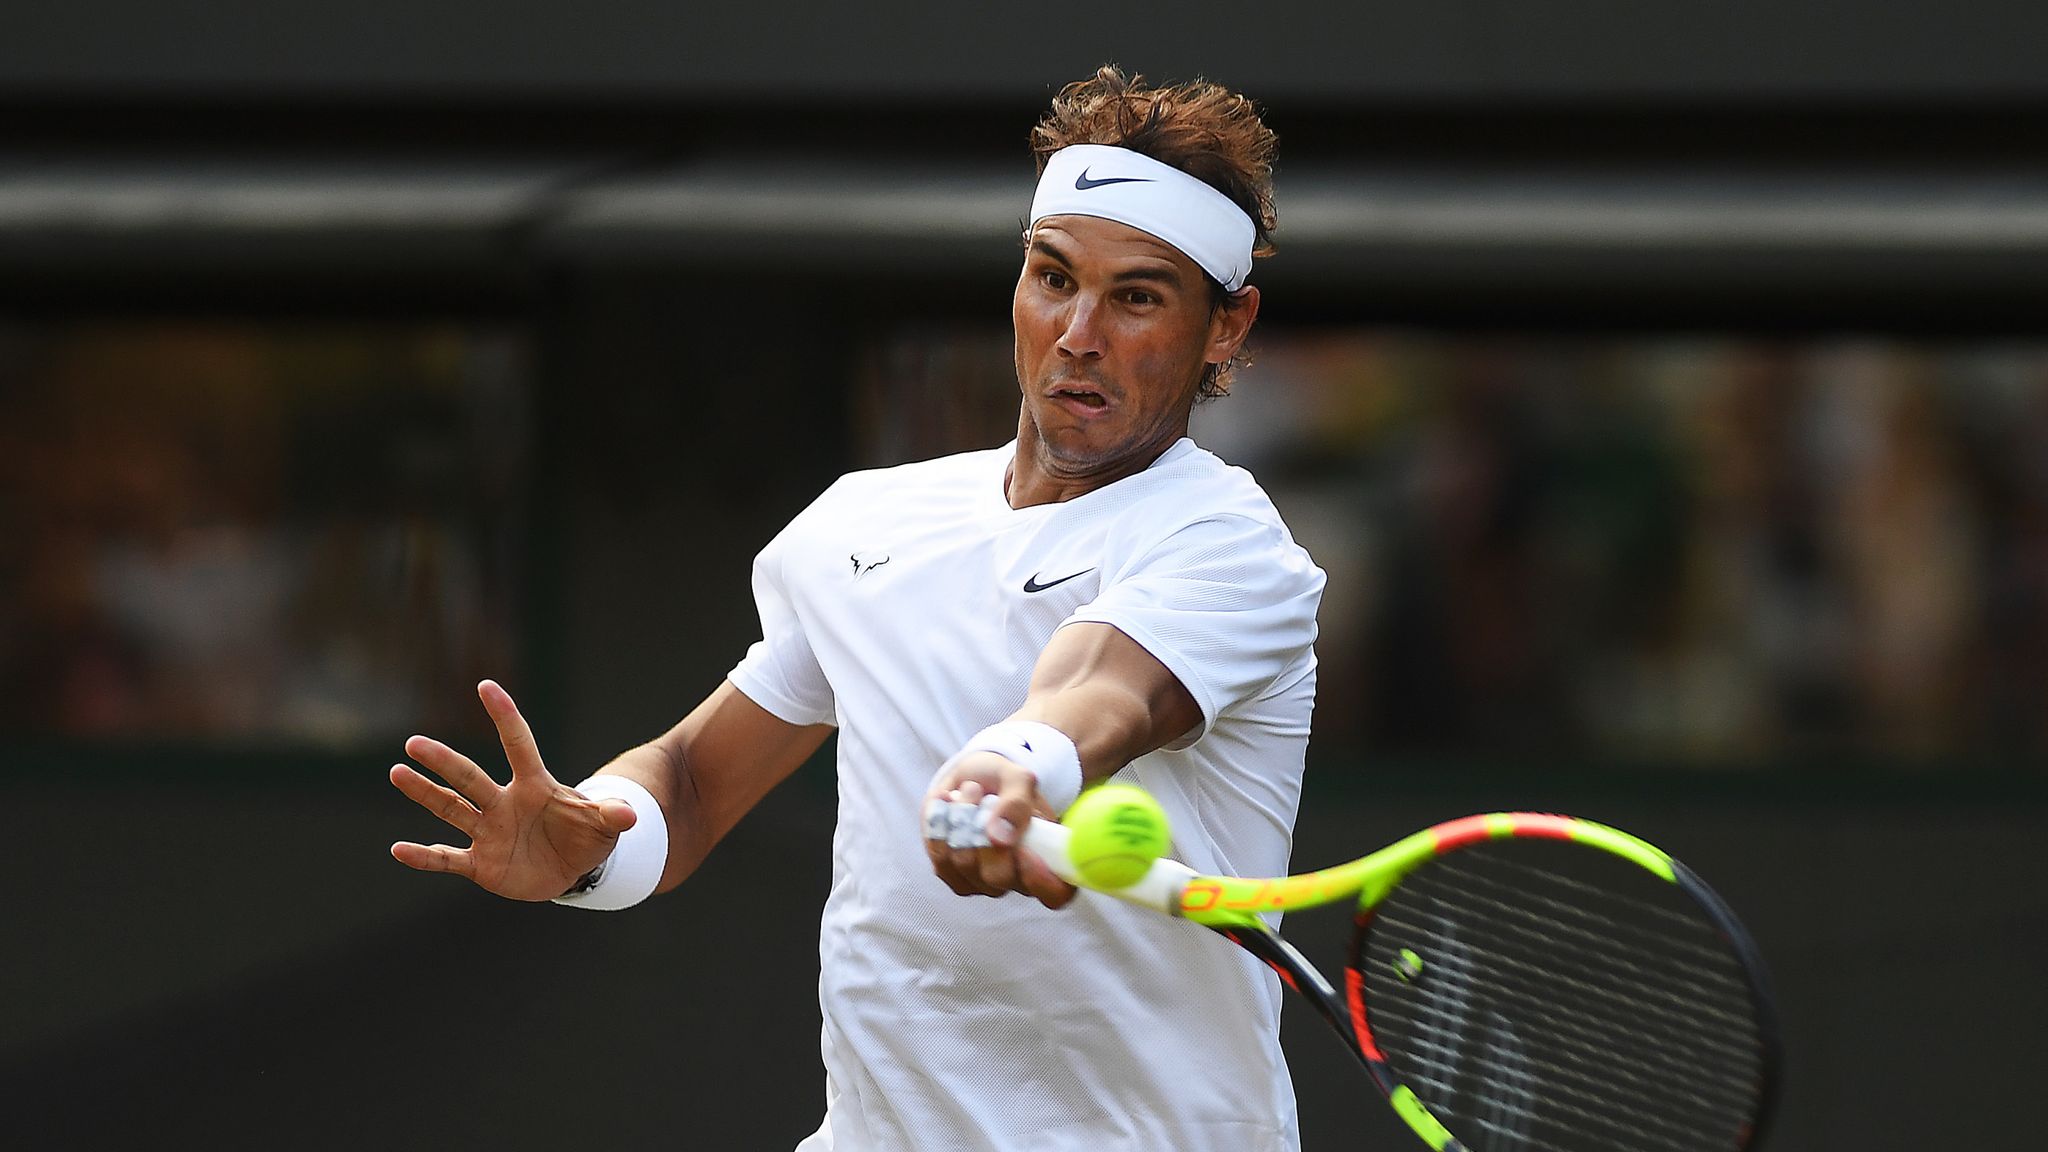 Rafael Nadal to face Nick Kyrgios in Wimbledon second round after beating Yuichi Sugita Tennis News Sky Sports